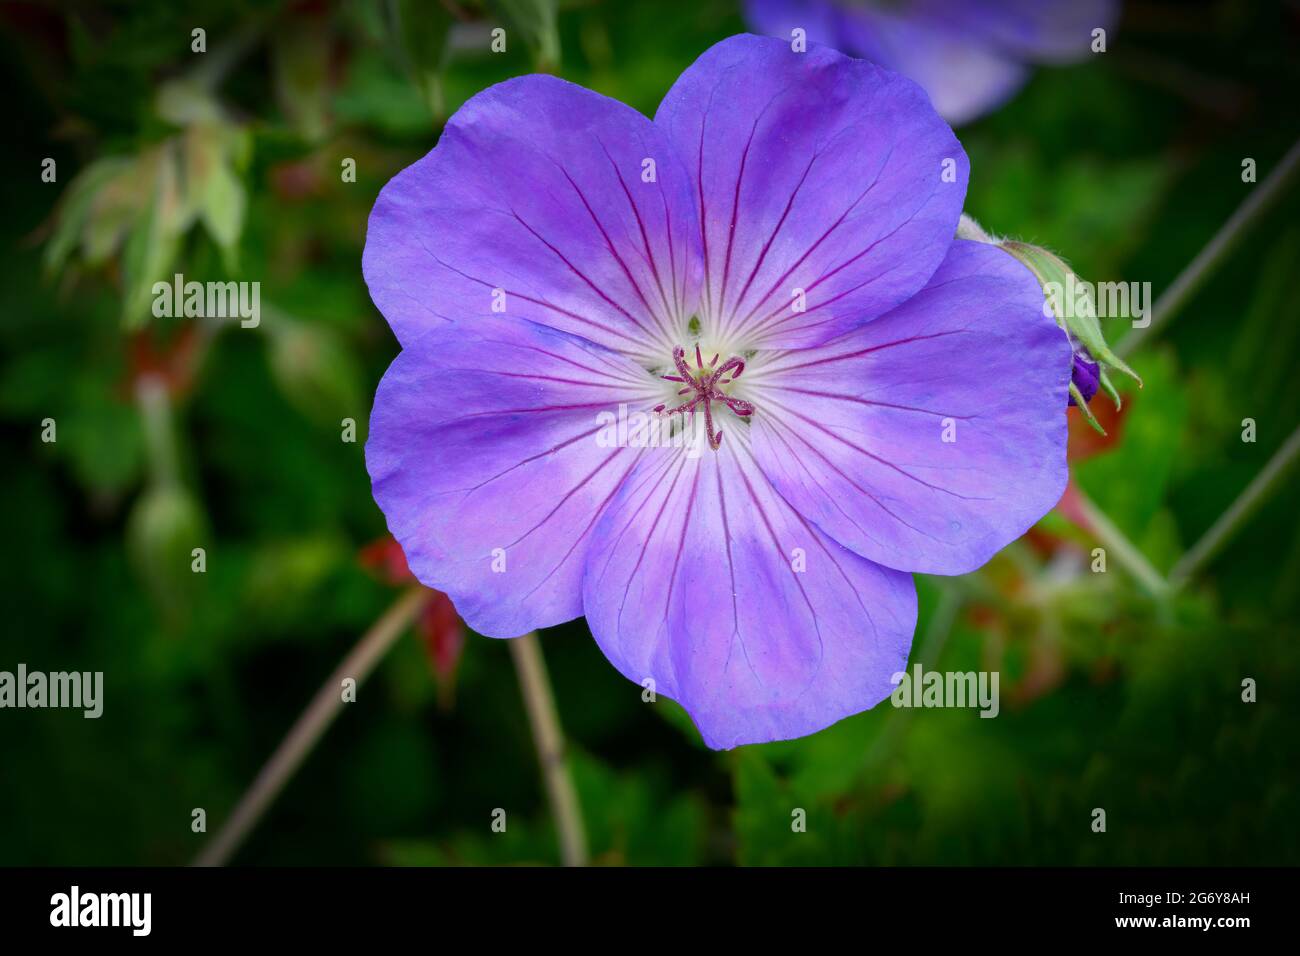 Solitary flower of the Blue Geranium also known as the Blue Cranesbill Stock Photo